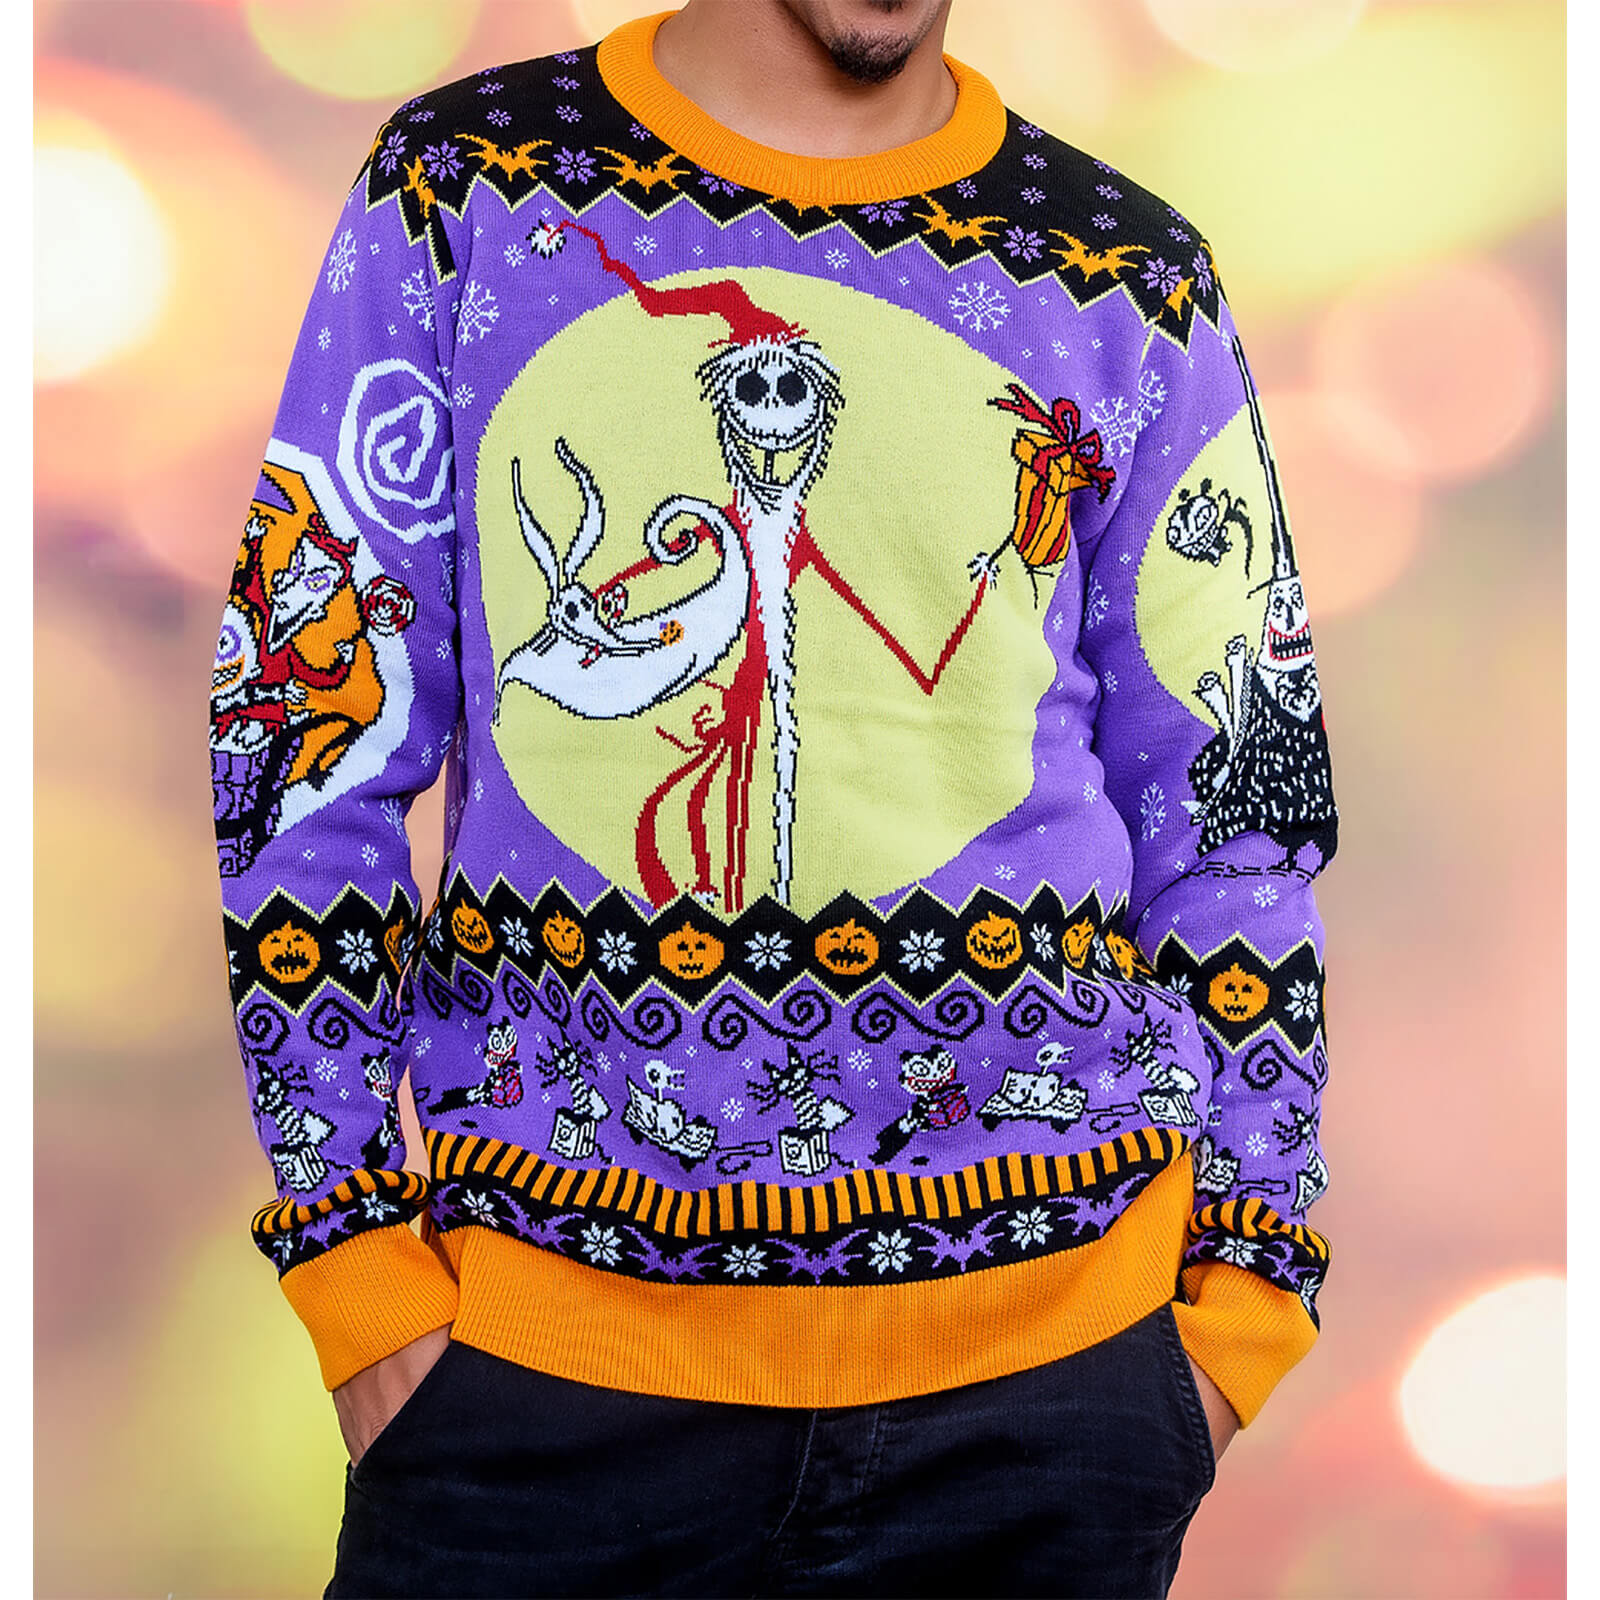 The Nightmare Before Christmas Christmas Jumper - XL product